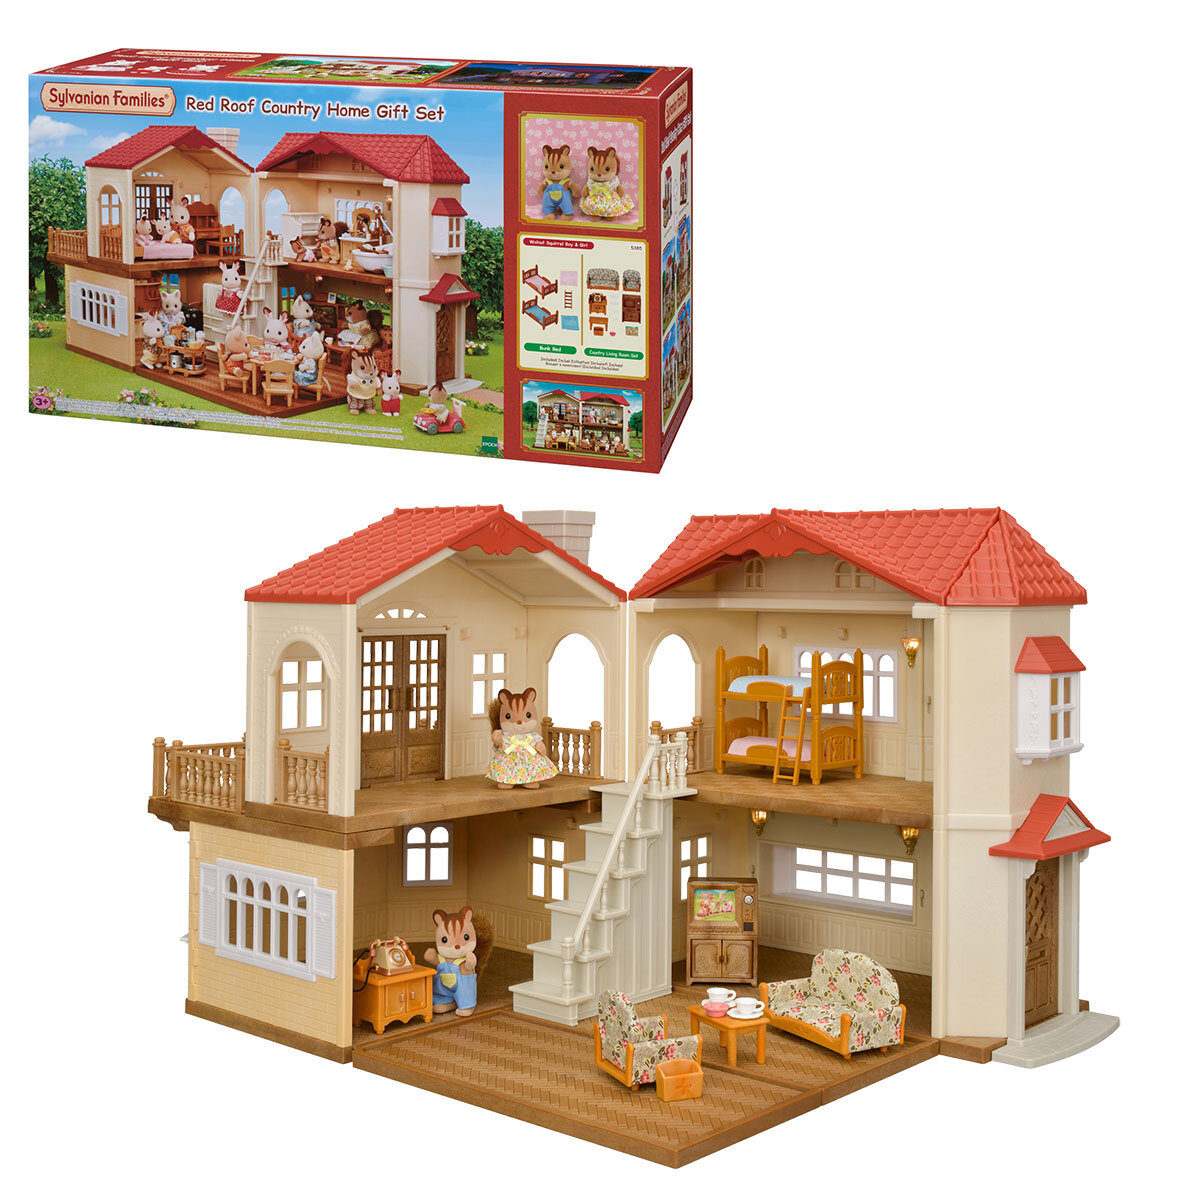 Buy Sylvanian Families Red Roof Country Home Box & Items Image at Costco.co.uk